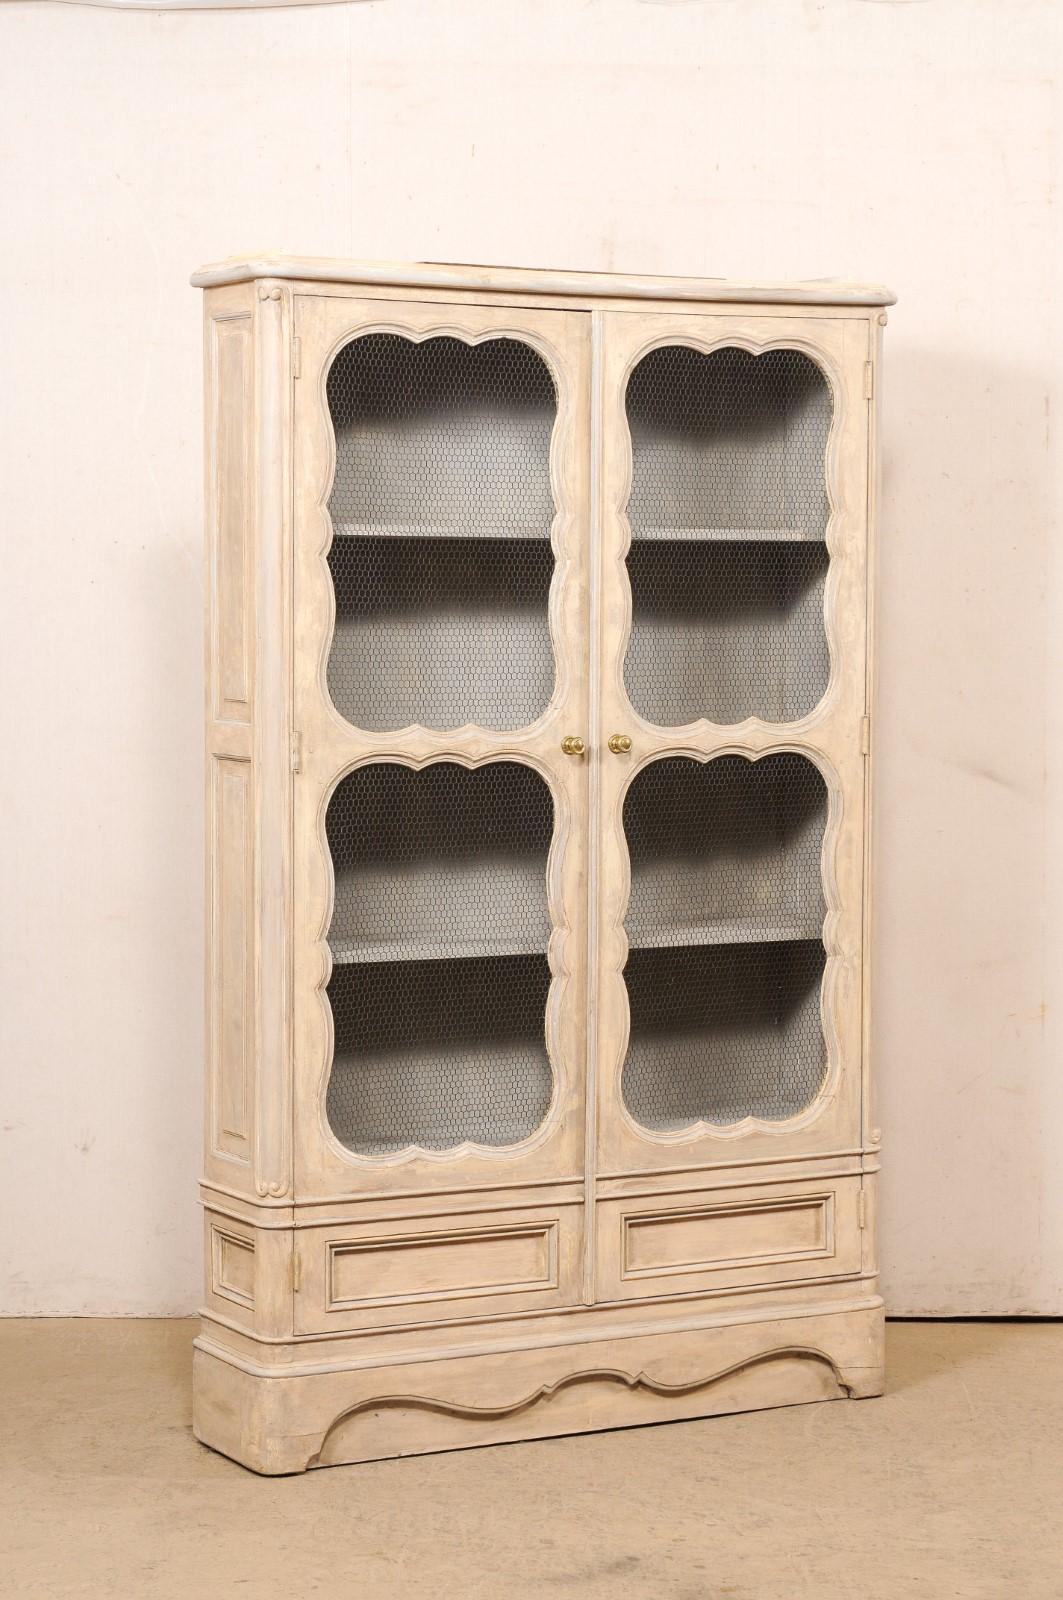 A French carved and painted wood bookcase, with wire door fronts, from the mid 20th century. This vintage display cabinet from France, standing approximately 6.75 feet in height, is fitted with a pair of decoratively scallop-carved panel doors with